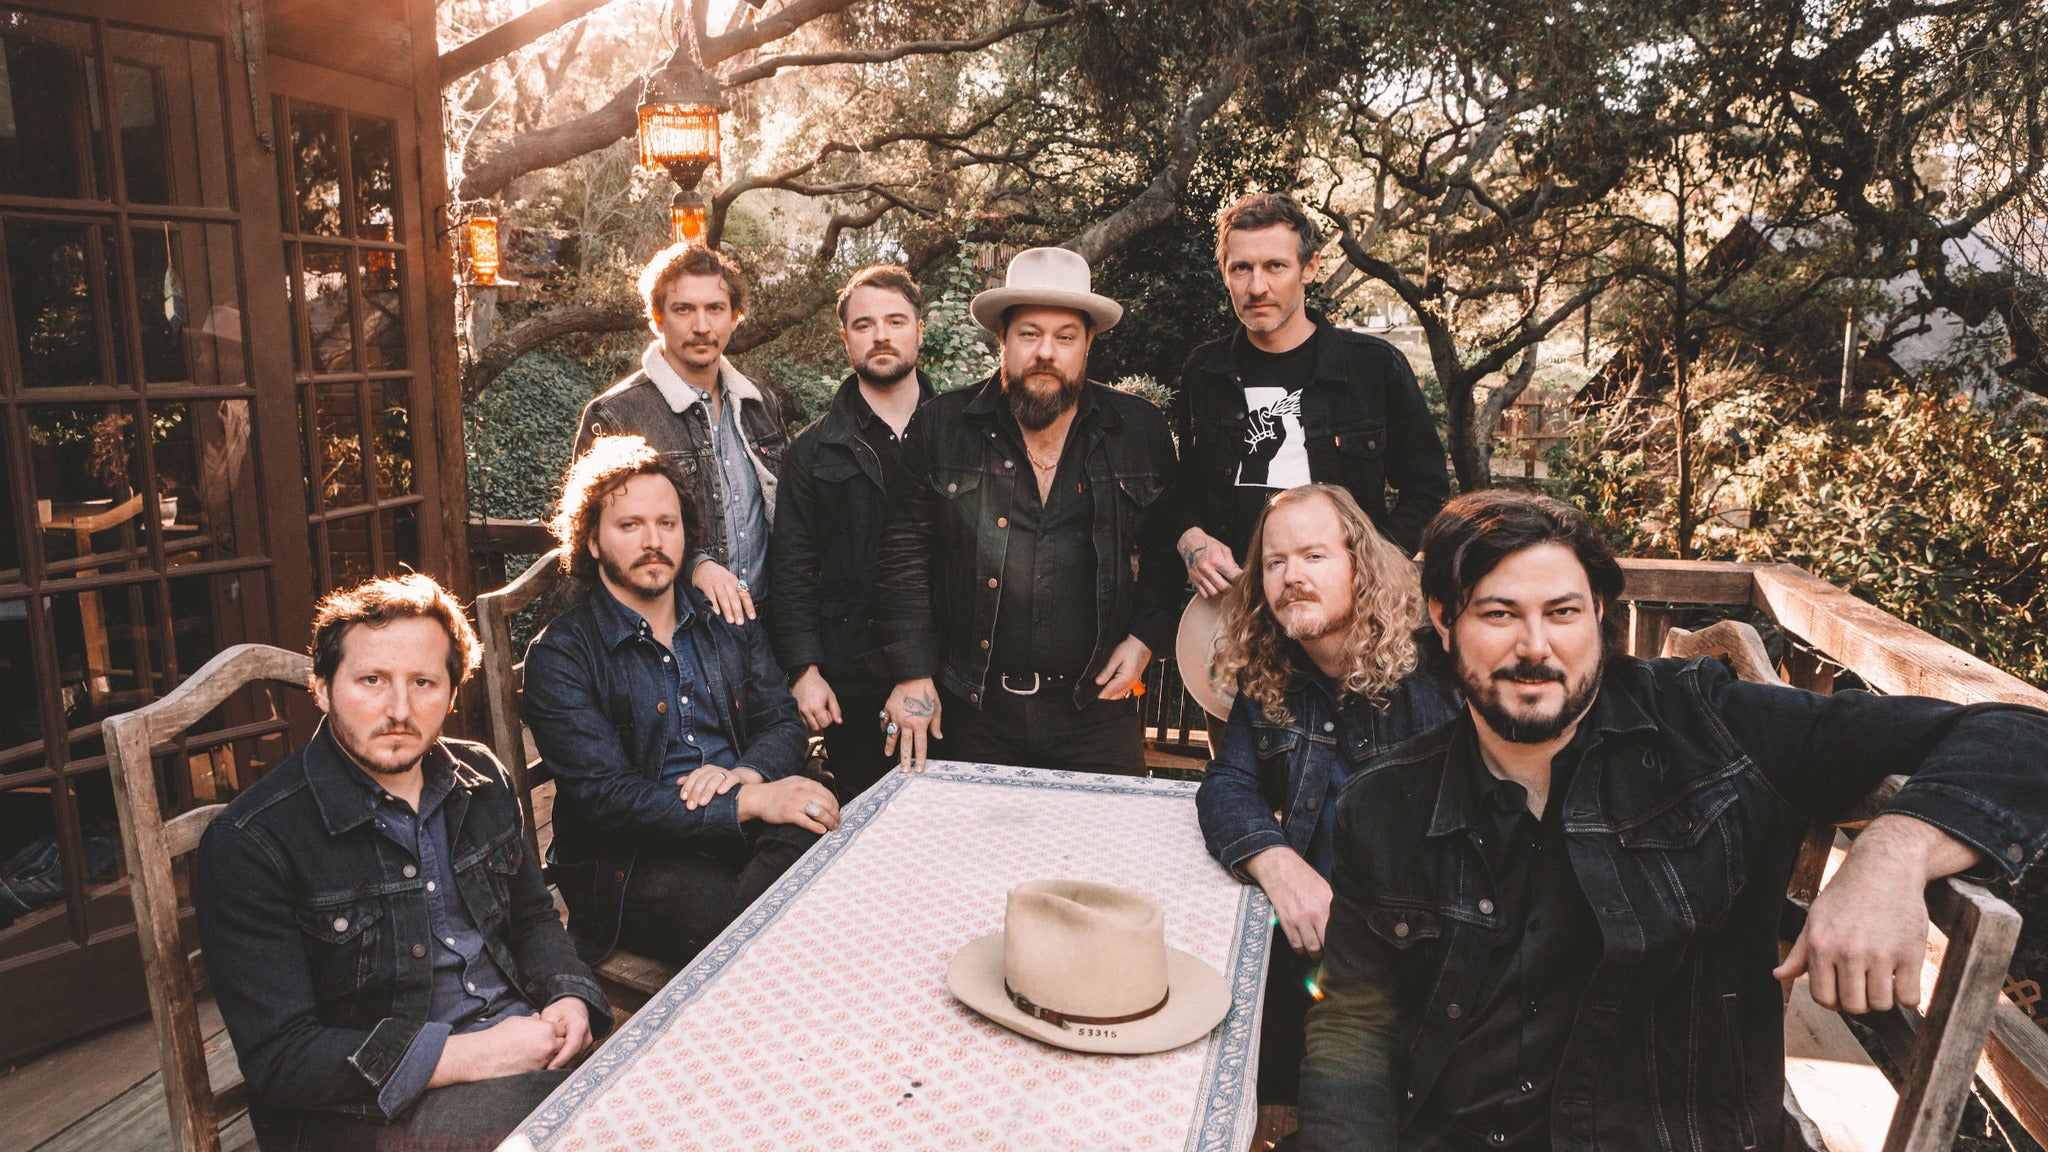 Nathaniel Rateliff & The Night Sweats in Saint Petersburg promo photo for Exclusive presale offer code